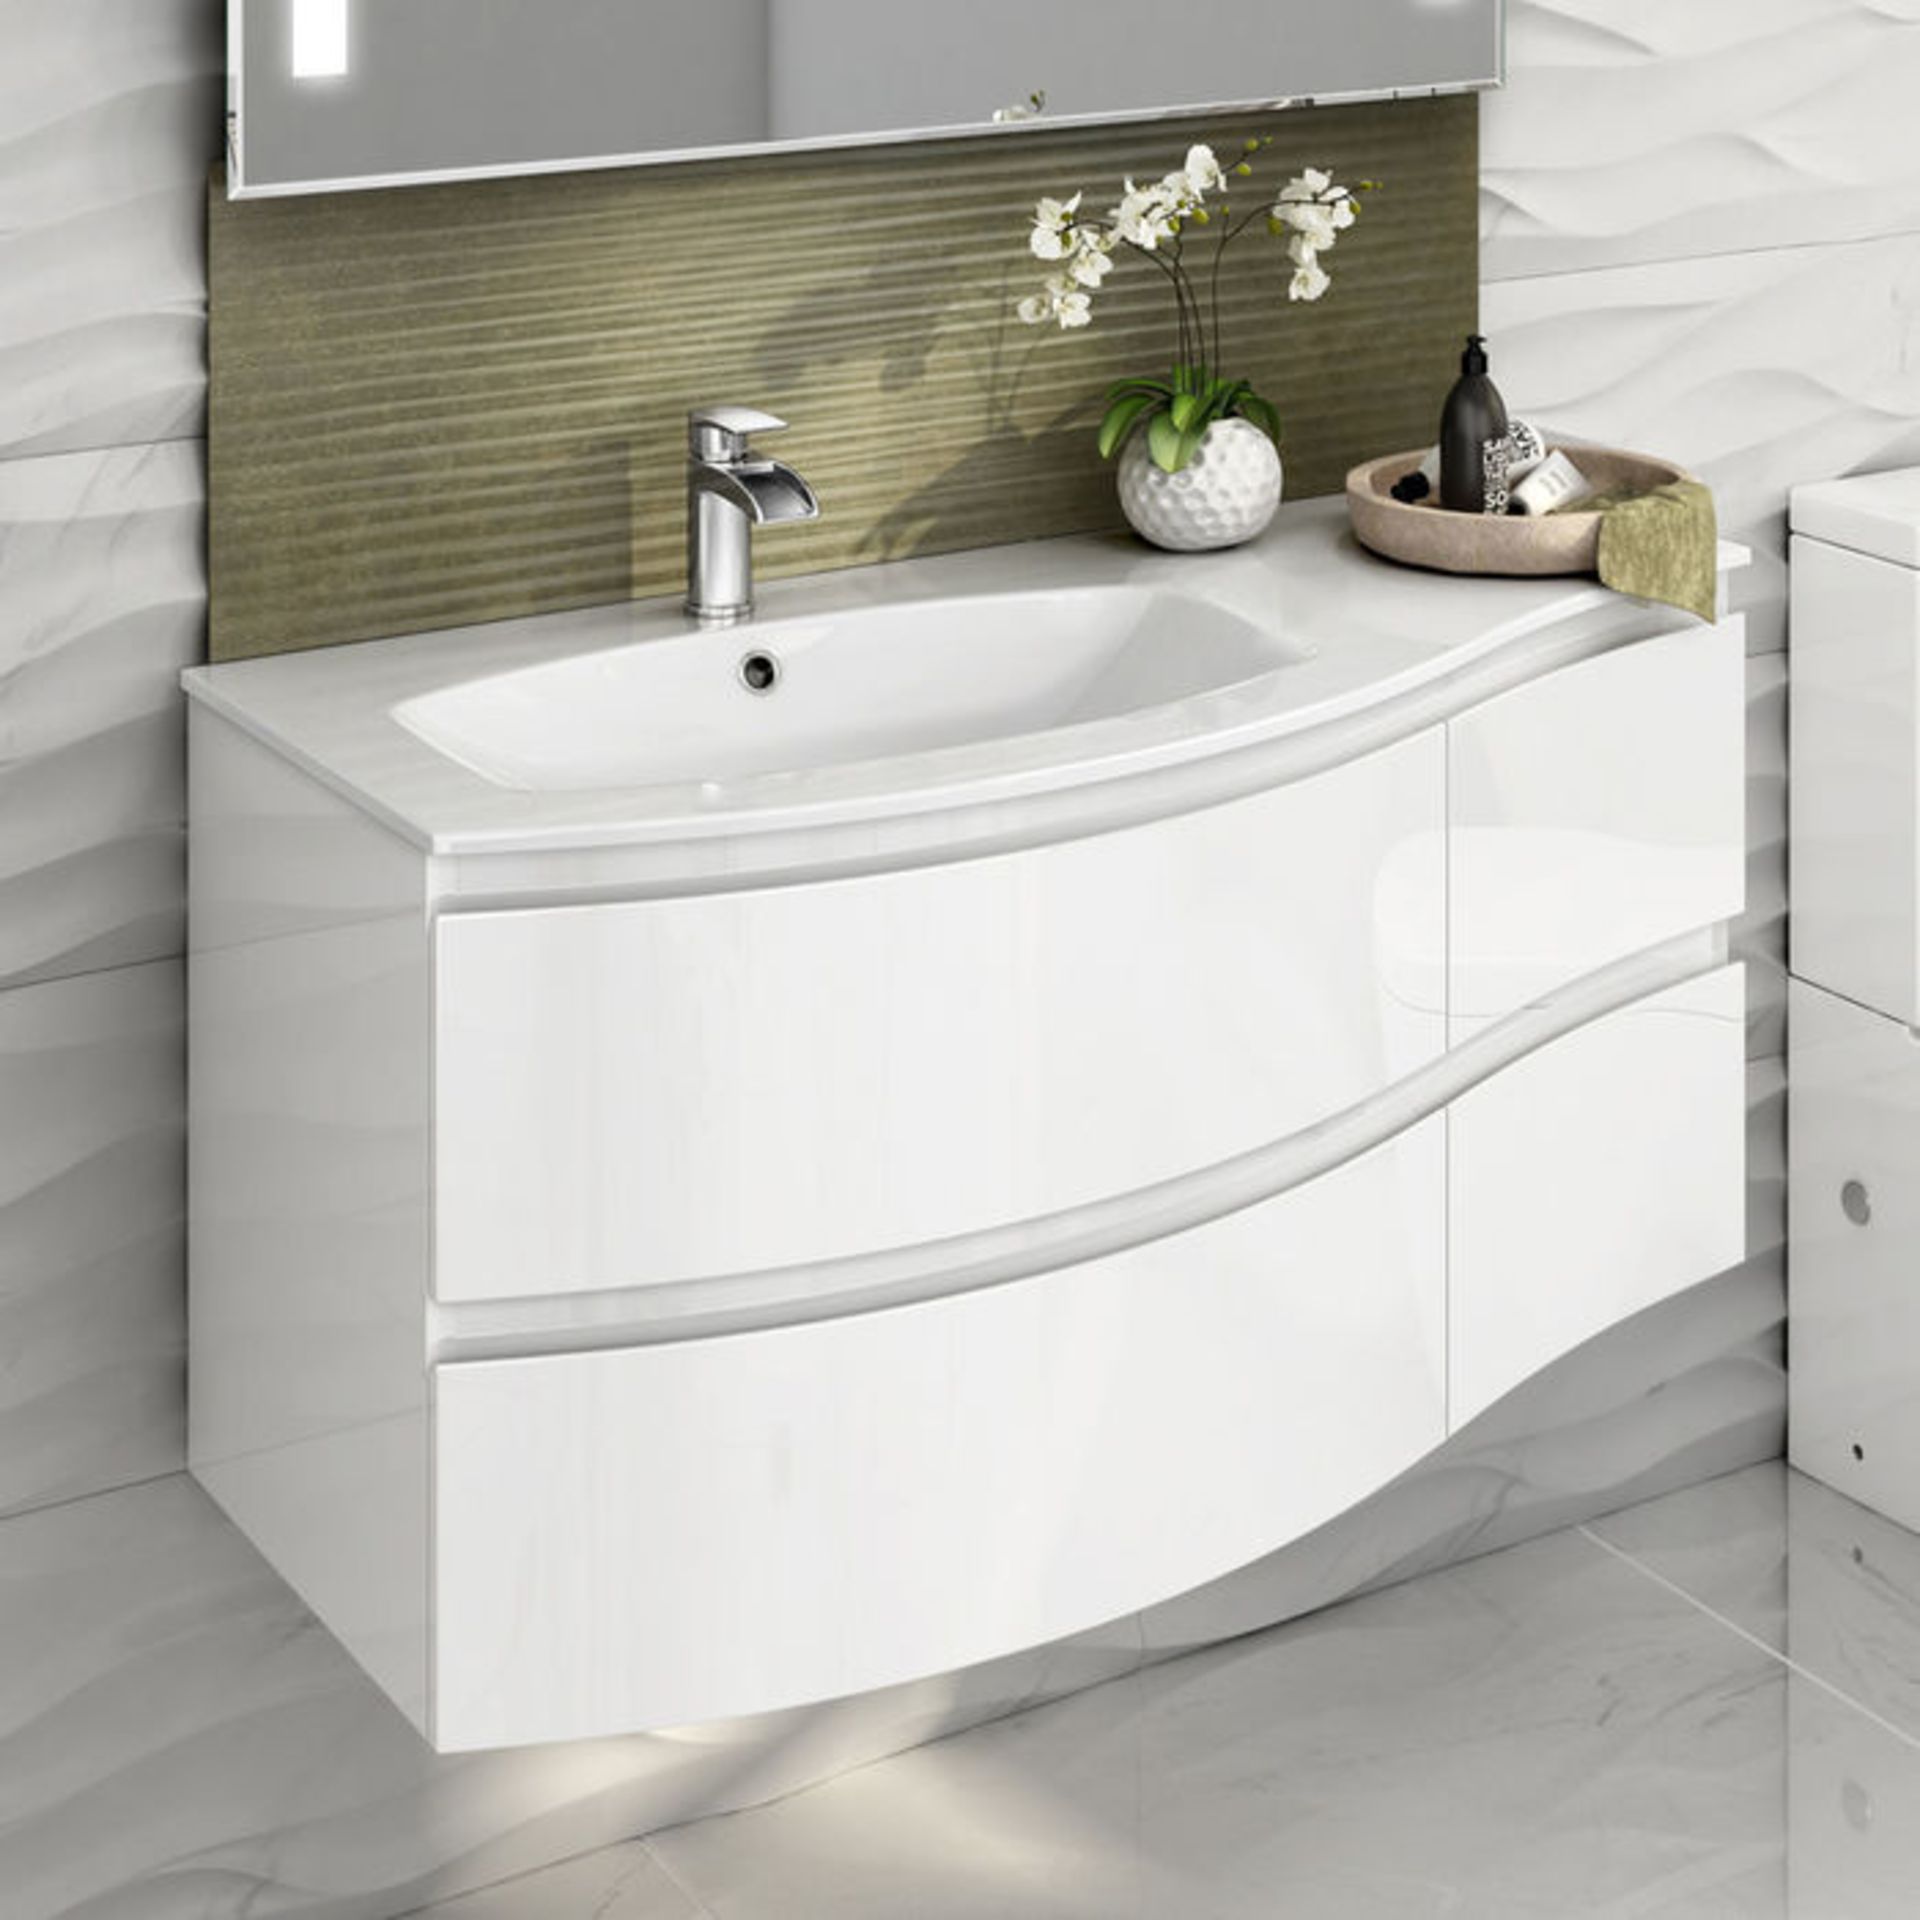 (AH4) 1040mm Amelie High Gloss White Curved Vanity Unit - Left Hand - Wall Hung. This premium option